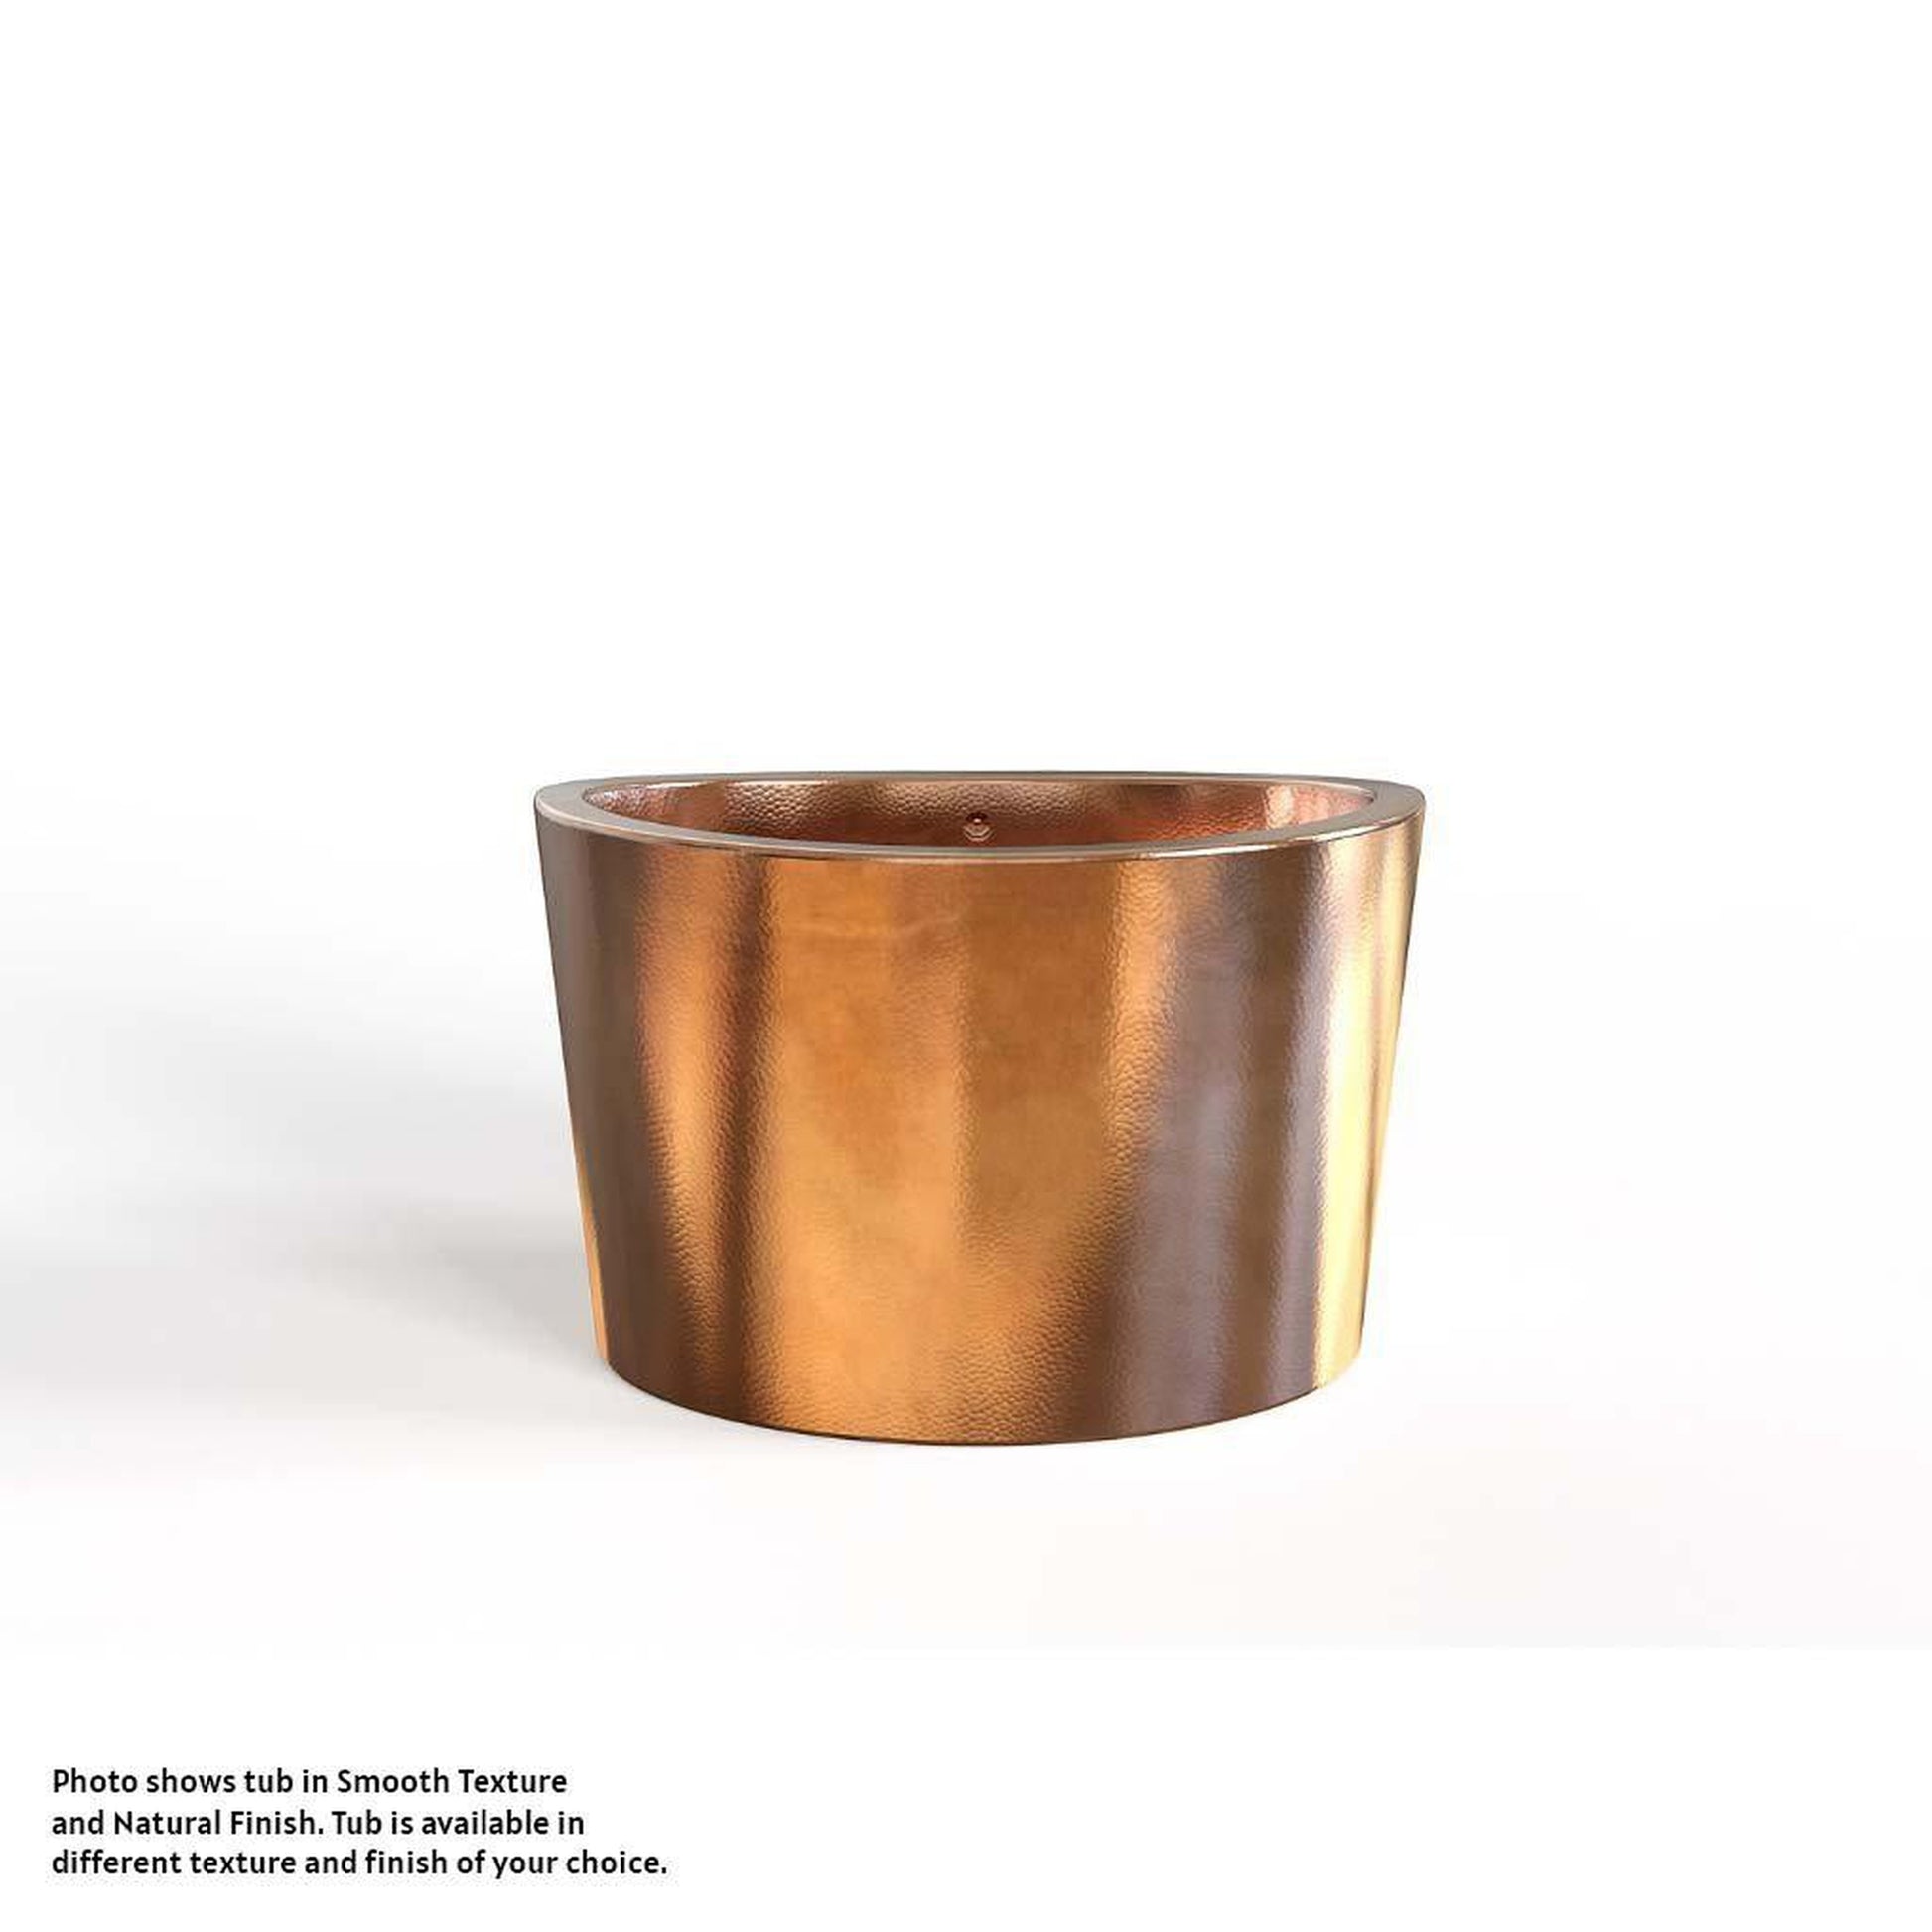 Amoretti Brothers Tokyo Spa 64" Freestanding Japanese Soaking Brass Tub in Brass Finish